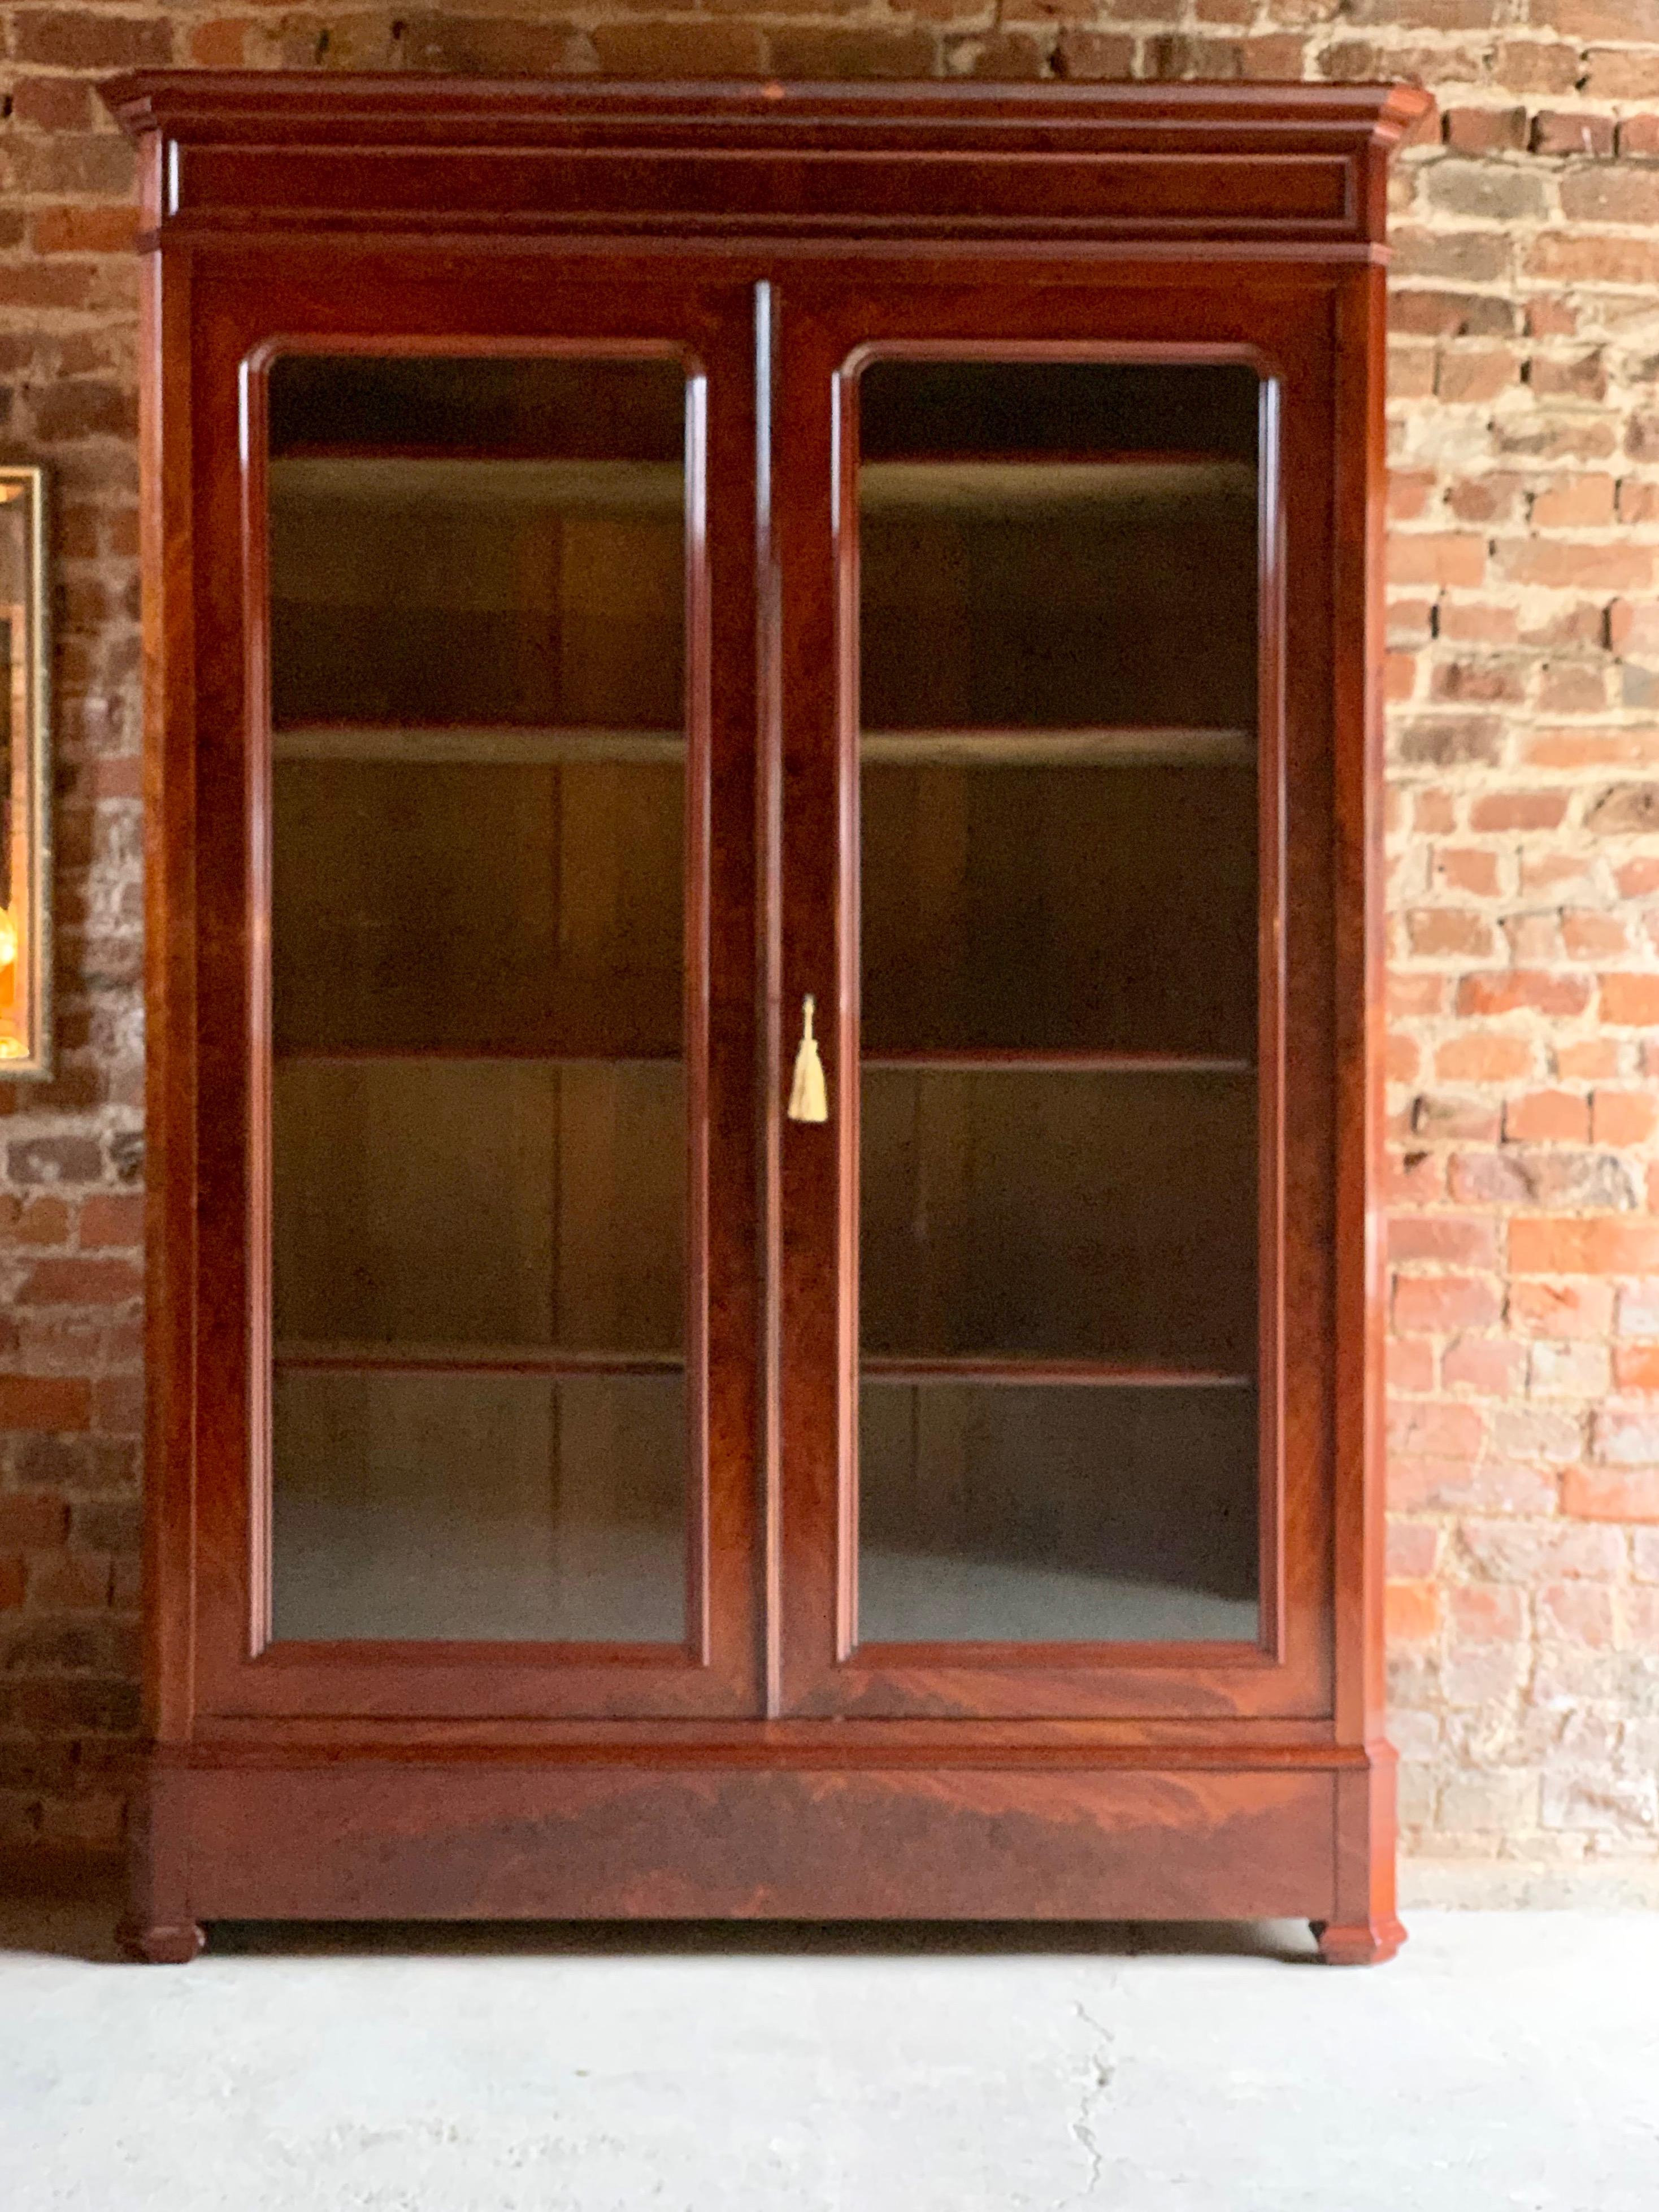 Antique 19th century French flamed mahogany bookcase vitrine, circa 1875.

A fabulous 19th century French flamed mahogany two door bookcase Vitrine, circa 1875, the large overhanging cornice above two glazed doors with four adjustable shelves within